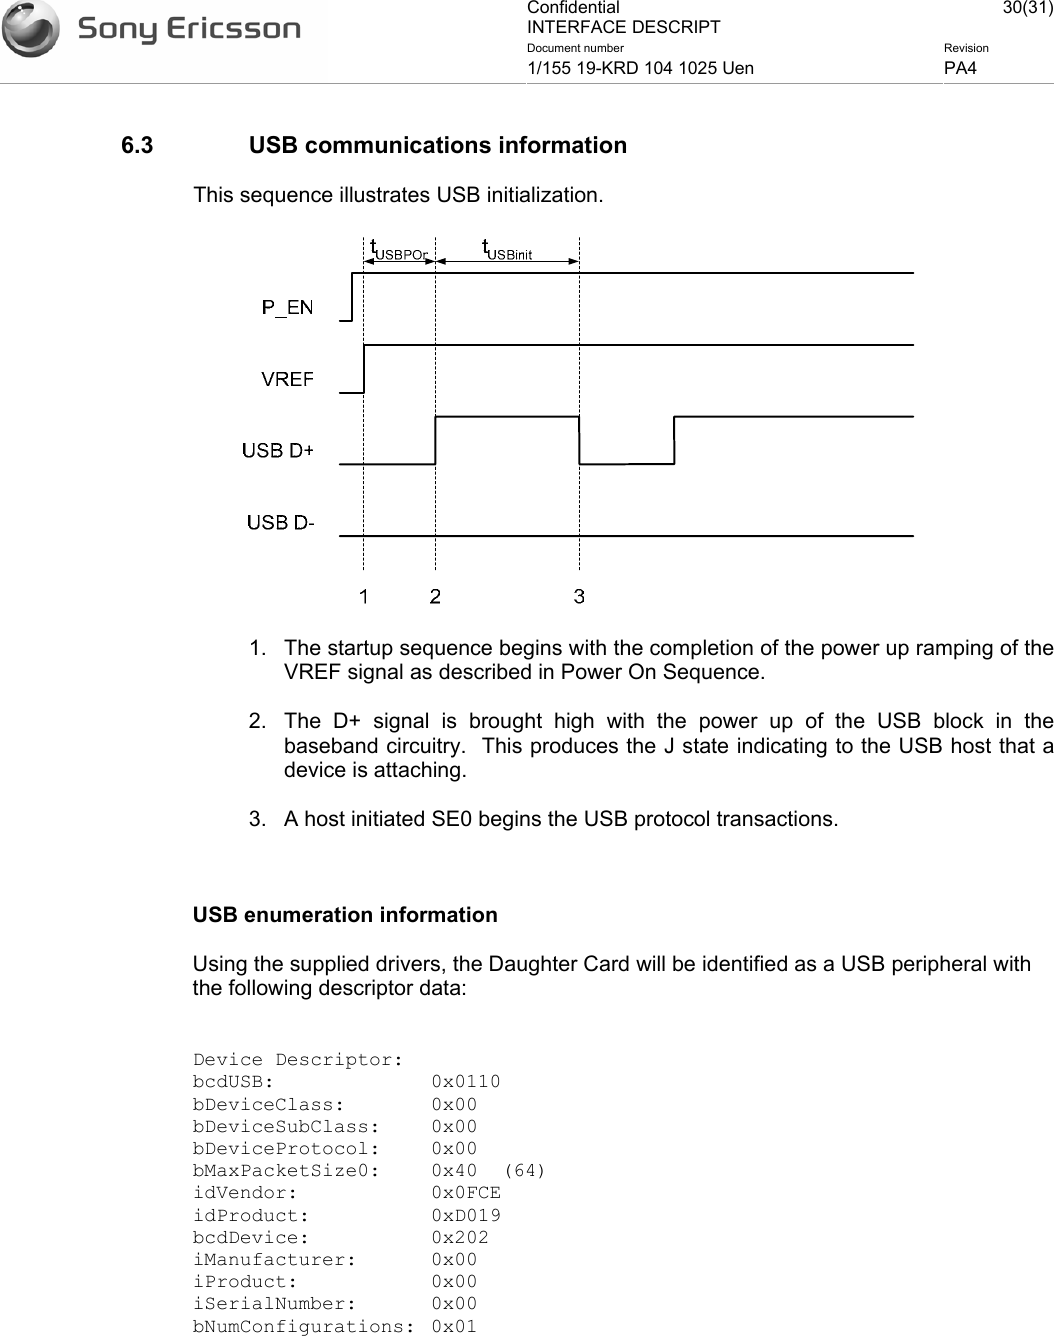 Confidential INTERFACE DESCRIPT 30(31)Document number  Revision 1/155 19-KRD 104 1025 Uen  PA4    6.3  USB communications information This sequence illustrates USB initialization.  1.  The startup sequence begins with the completion of the power up ramping of the VREF signal as described in Power On Sequence. 2.  The D+ signal is brought high with the power up of the USB block in the baseband circuitry.  This produces the J state indicating to the USB host that a device is attaching. 3.  A host initiated SE0 begins the USB protocol transactions.  USB enumeration information Using the supplied drivers, the Daughter Card will be identified as a USB peripheral with the following descriptor data:  Device Descriptor: bcdUSB: 0x0110 bDeviceClass: 0x00 bDeviceSubClass: 0x00 bDeviceProtocol: 0x00 bMaxPacketSize0:  0x40  (64) idVendor: 0x0FCE idProduct: 0xD019 bcdDevice: 0x202 iManufacturer: 0x00 iProduct: 0x00 iSerialNumber: 0x00 bNumConfigurations: 0x01  